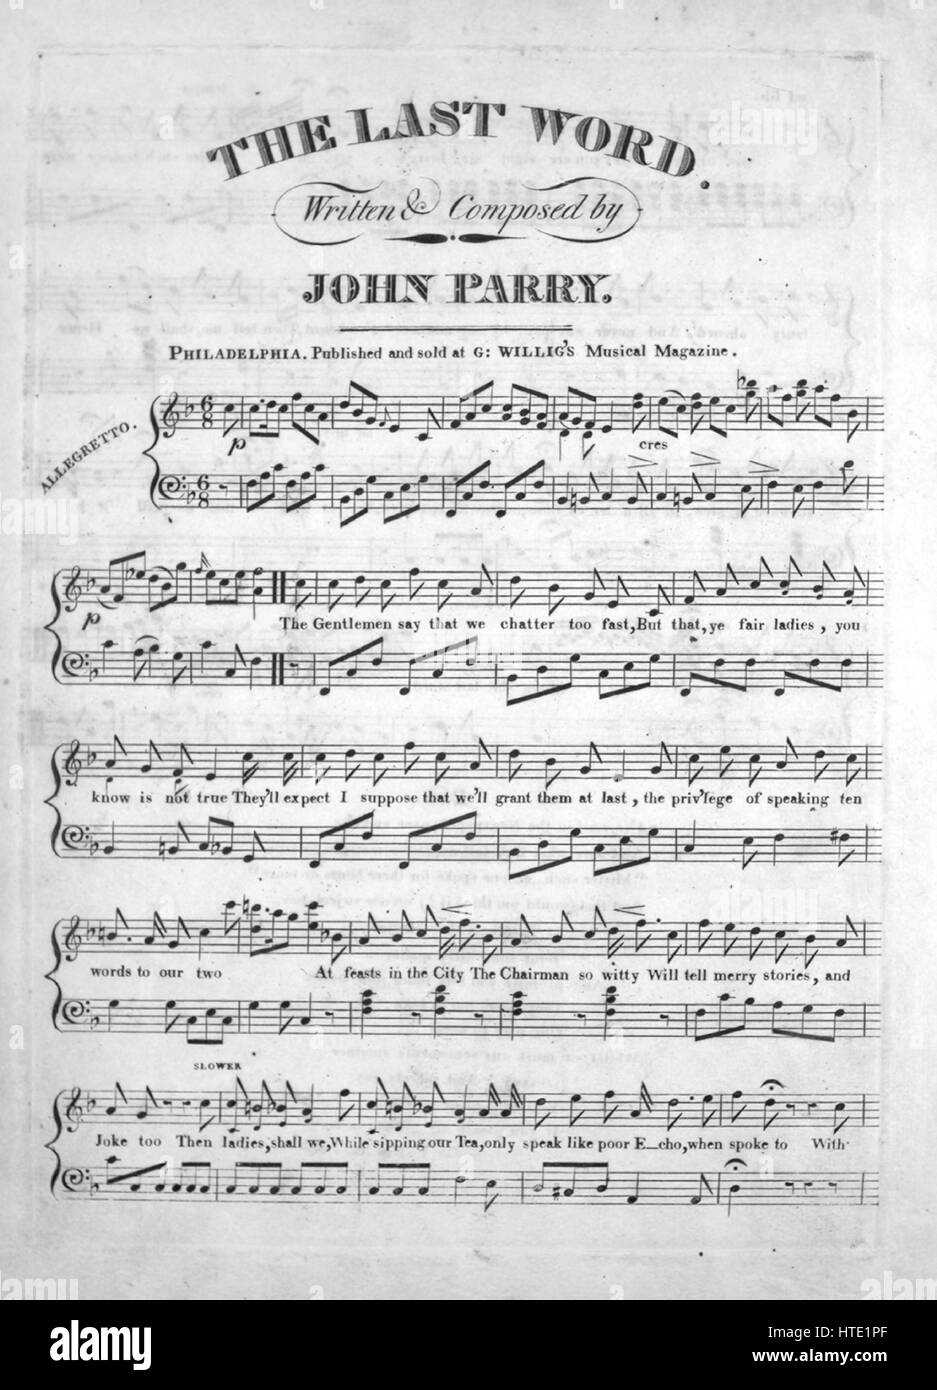 Sheet music cover image of the song 'The Last Word', with original authorship notes reading 'Written and Composed by John Parry', United States, 1900. The publisher is listed as 'G. Willig's Musical Magazine', the form of composition is 'strophic with chorus', the instrumentation is 'piano and voice', the first line reads 'The Gentlemen say that we chatter too fast, But that, ye fair ladies, you know is not true', and the illustration artist is listed as 'None'. Stock Photo